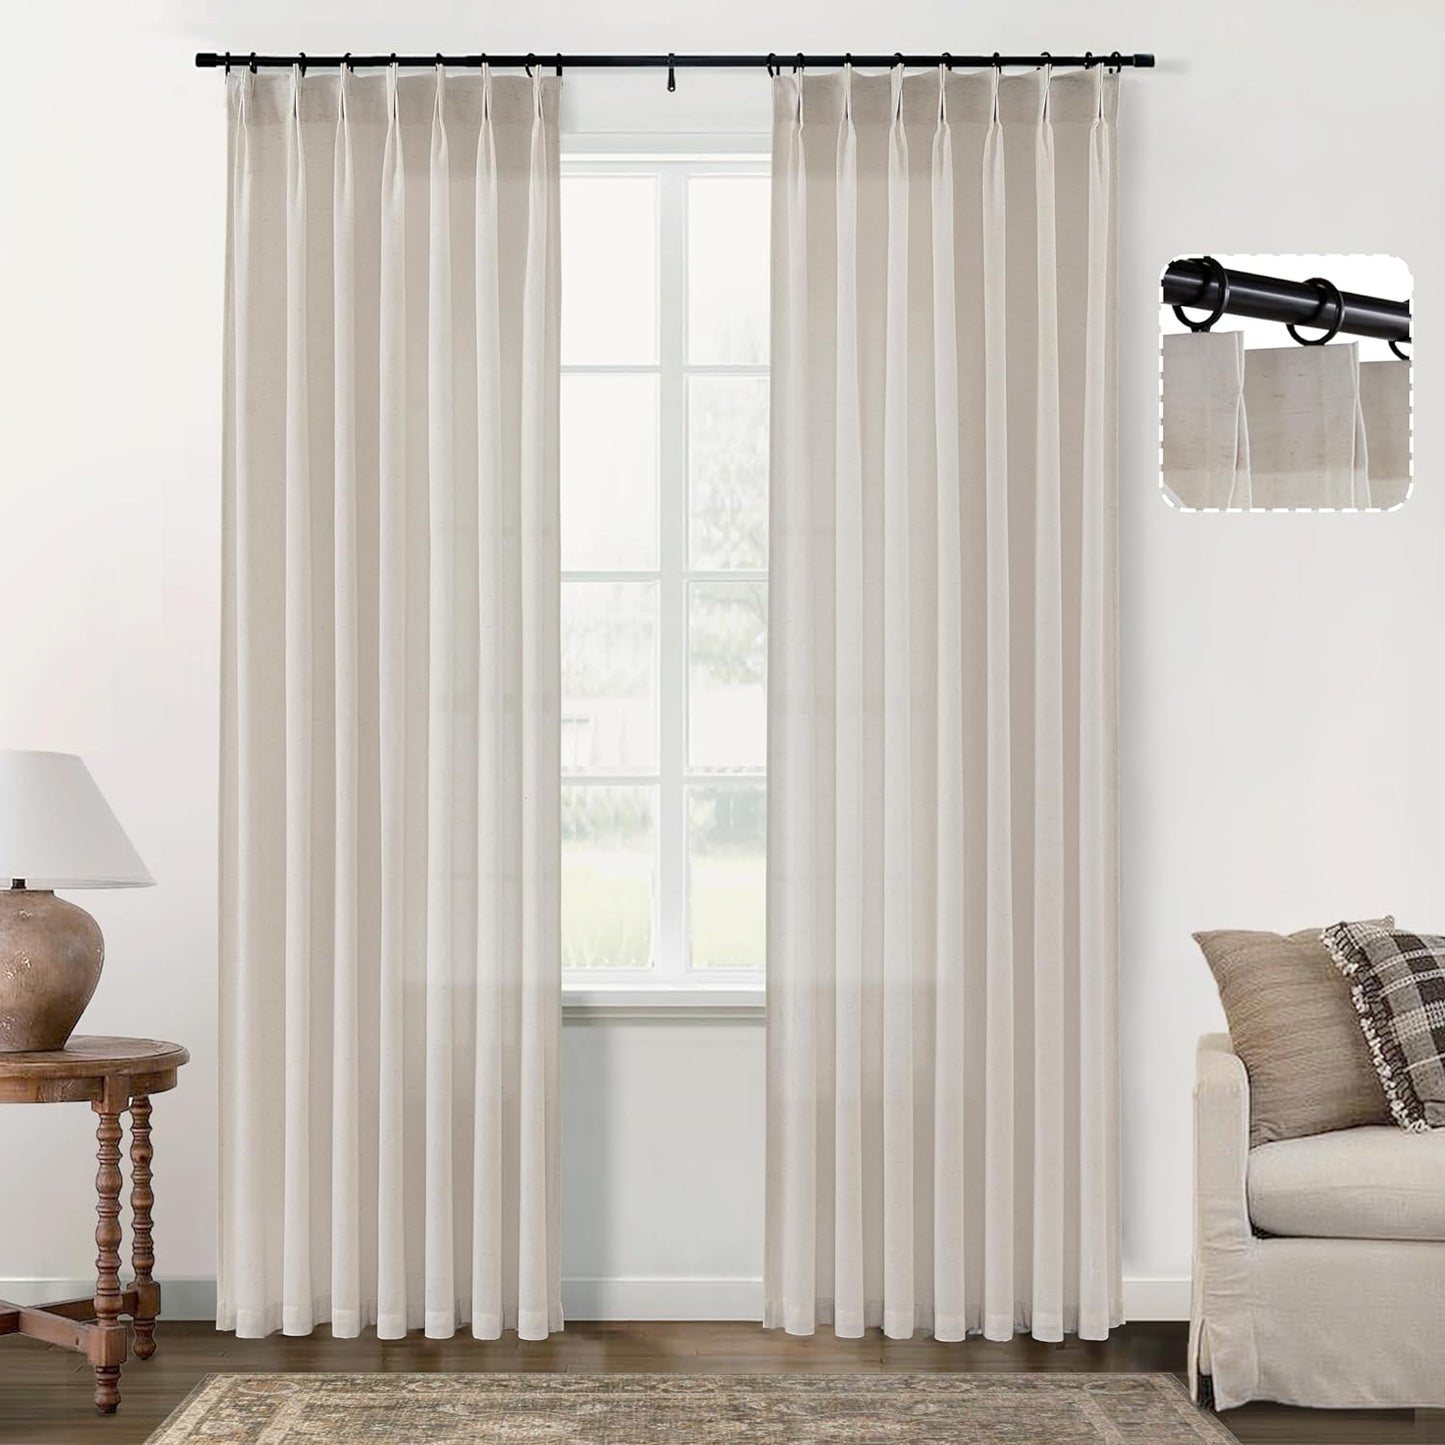 SHINELAND White Linen Curtains 84 Inches Long for Bedroom 2 Panels Set,Sheer Boho Pinch Pleated with Hooks Back Tab Window Sheers Draperies 84 Length for Dining Room Living Room Office at Home  SHINELAND Beige 2X(40"Wx120"L) 